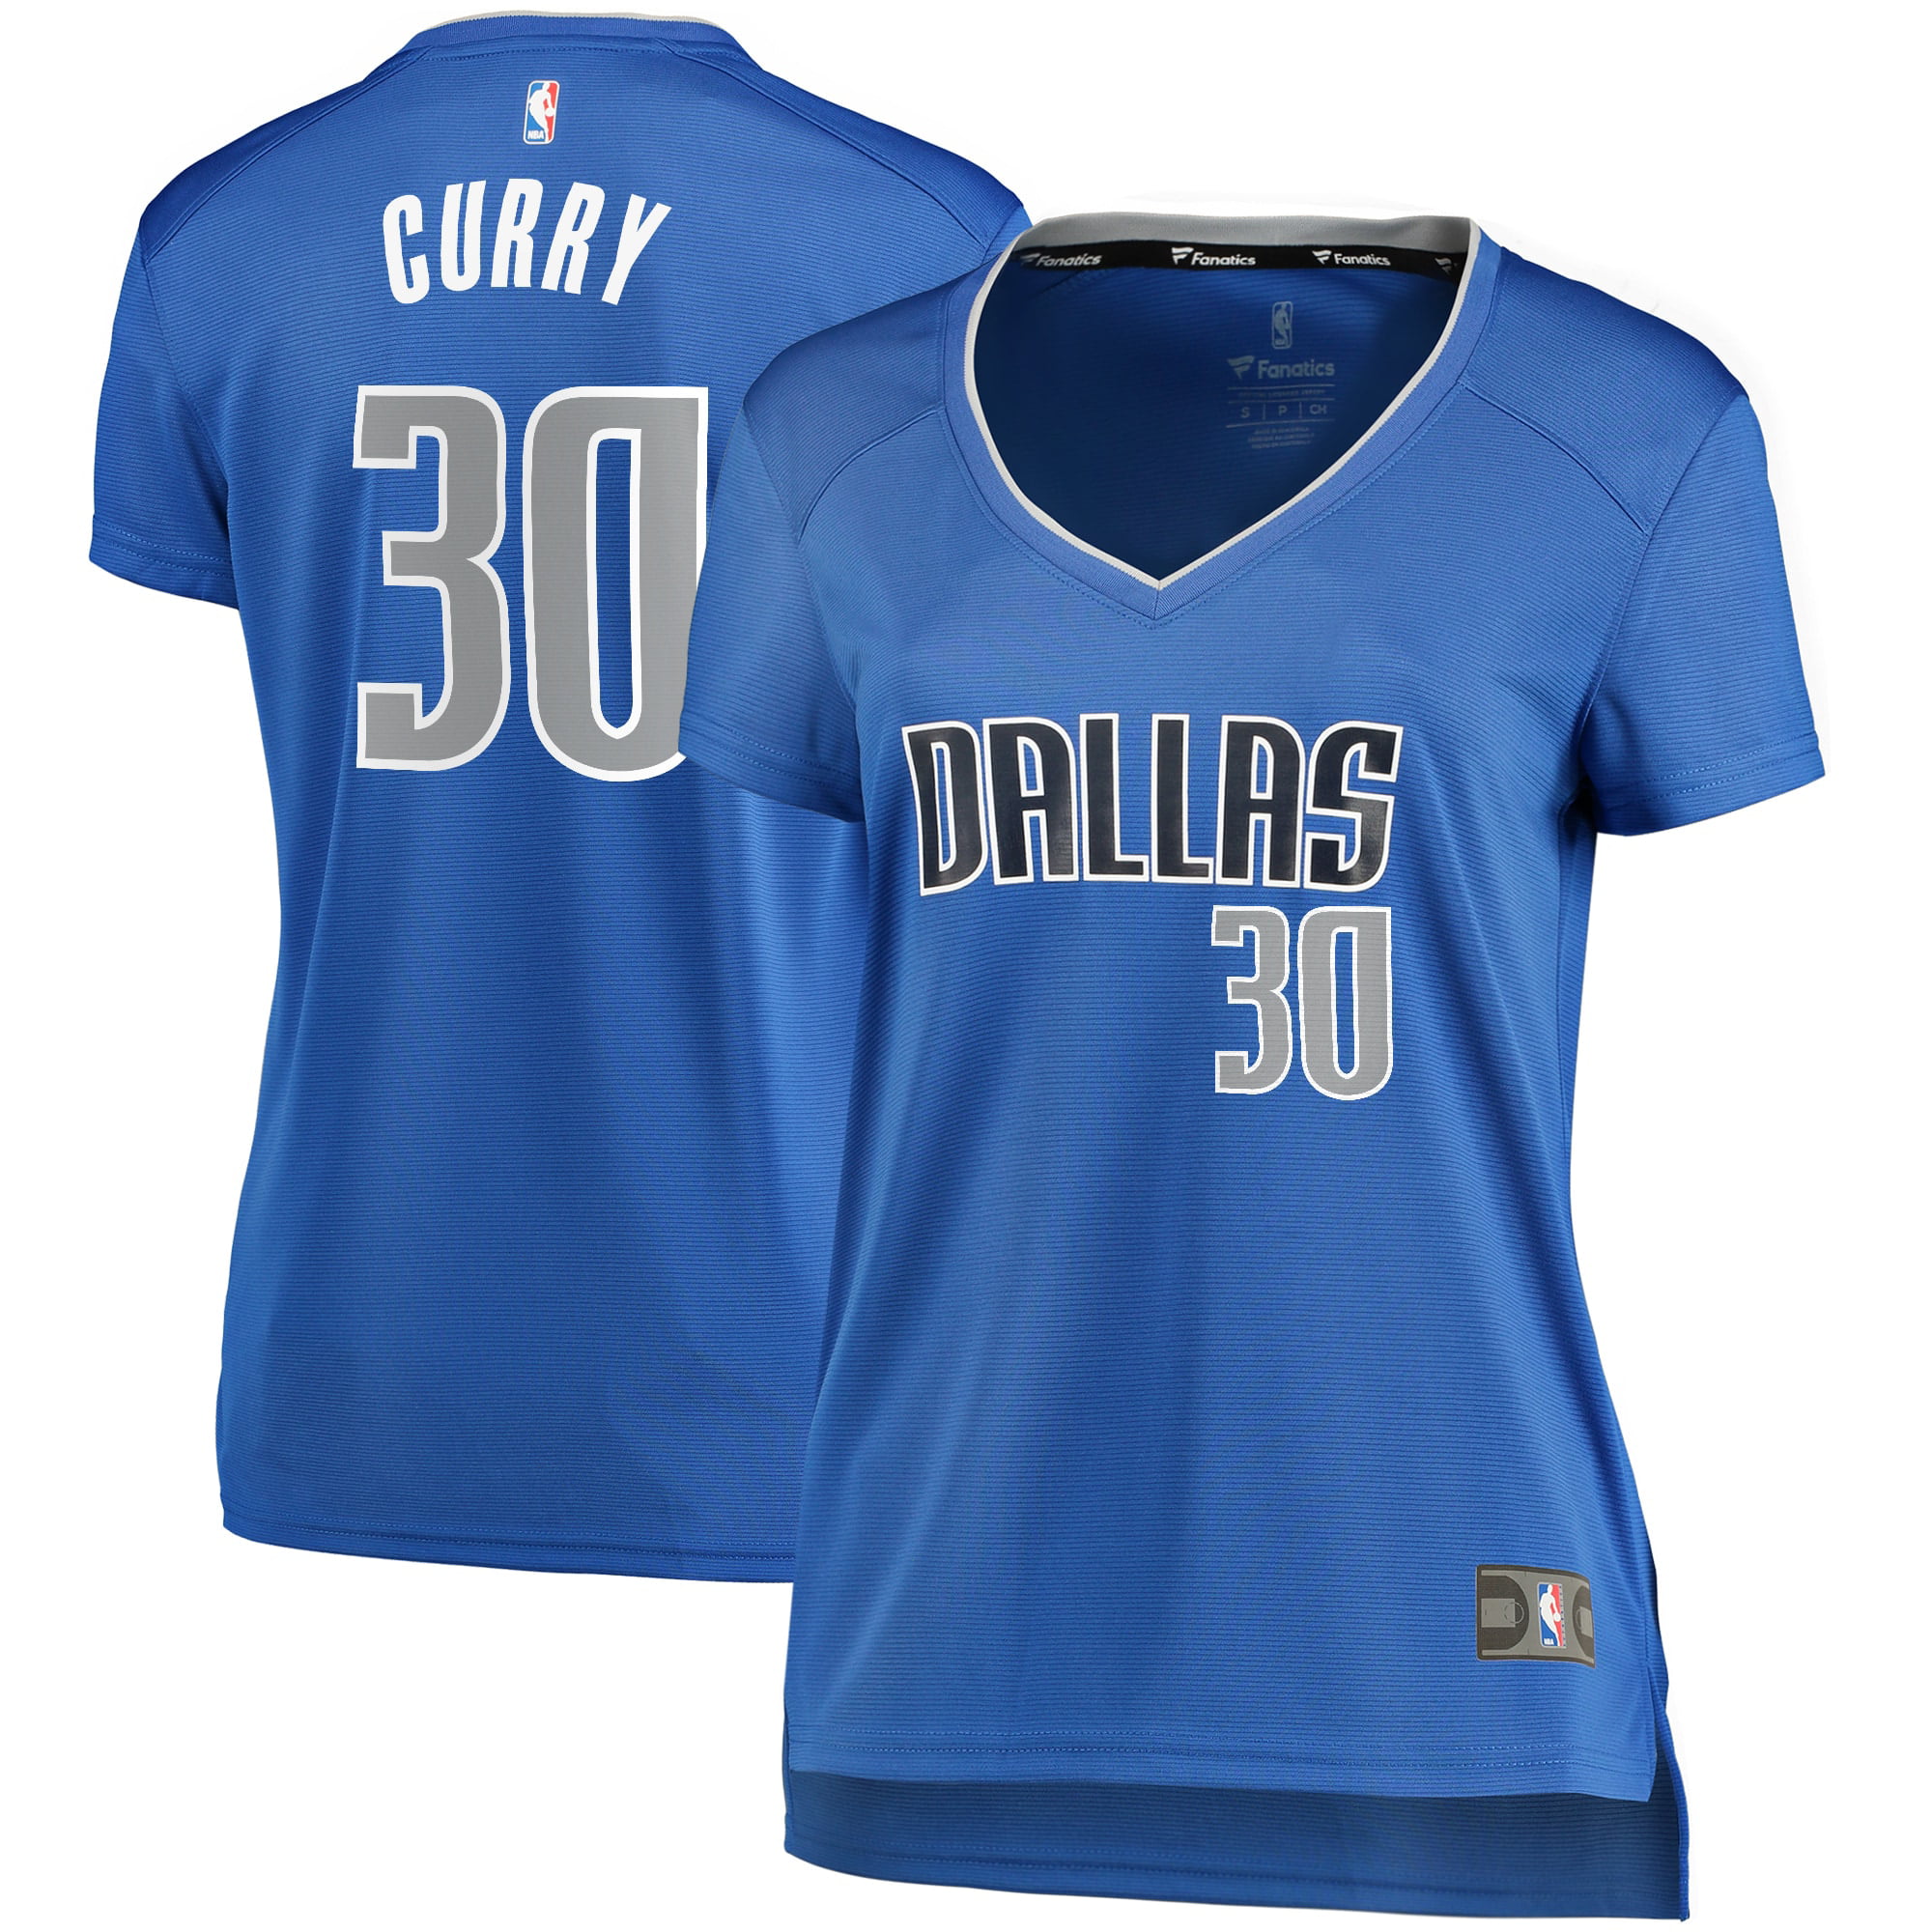 seth curry jersey youth